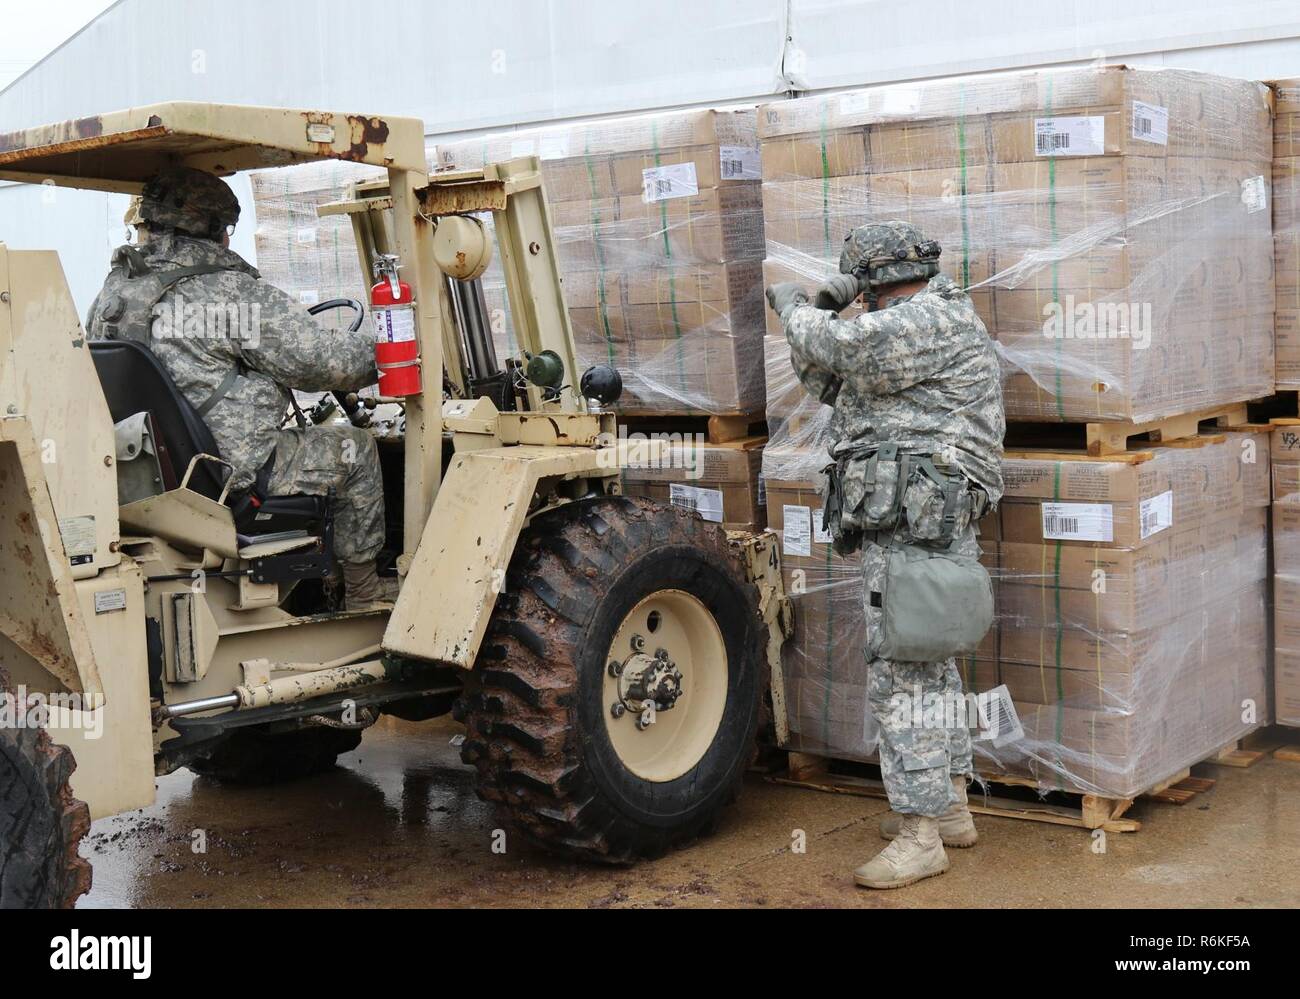 U.S. Army Reserve Soldiers with the 79th Quartermaster Company based in Houston, Texas, move pallets of Meals Ready-to-Eat during Joint Readiness Training Center (JRTC) Rotation 17-07, at Fort Polk, Louisiana, May 5 to 26, 2017.  JRTC provides America’s military forces relevant, rigorous, multi-echelon training in a decisive action and mission rehearsal exercise environment to develop adaptive leaders, confident units, and robust capabilities across the range of military operations achieving Army readiness. Stock Photo